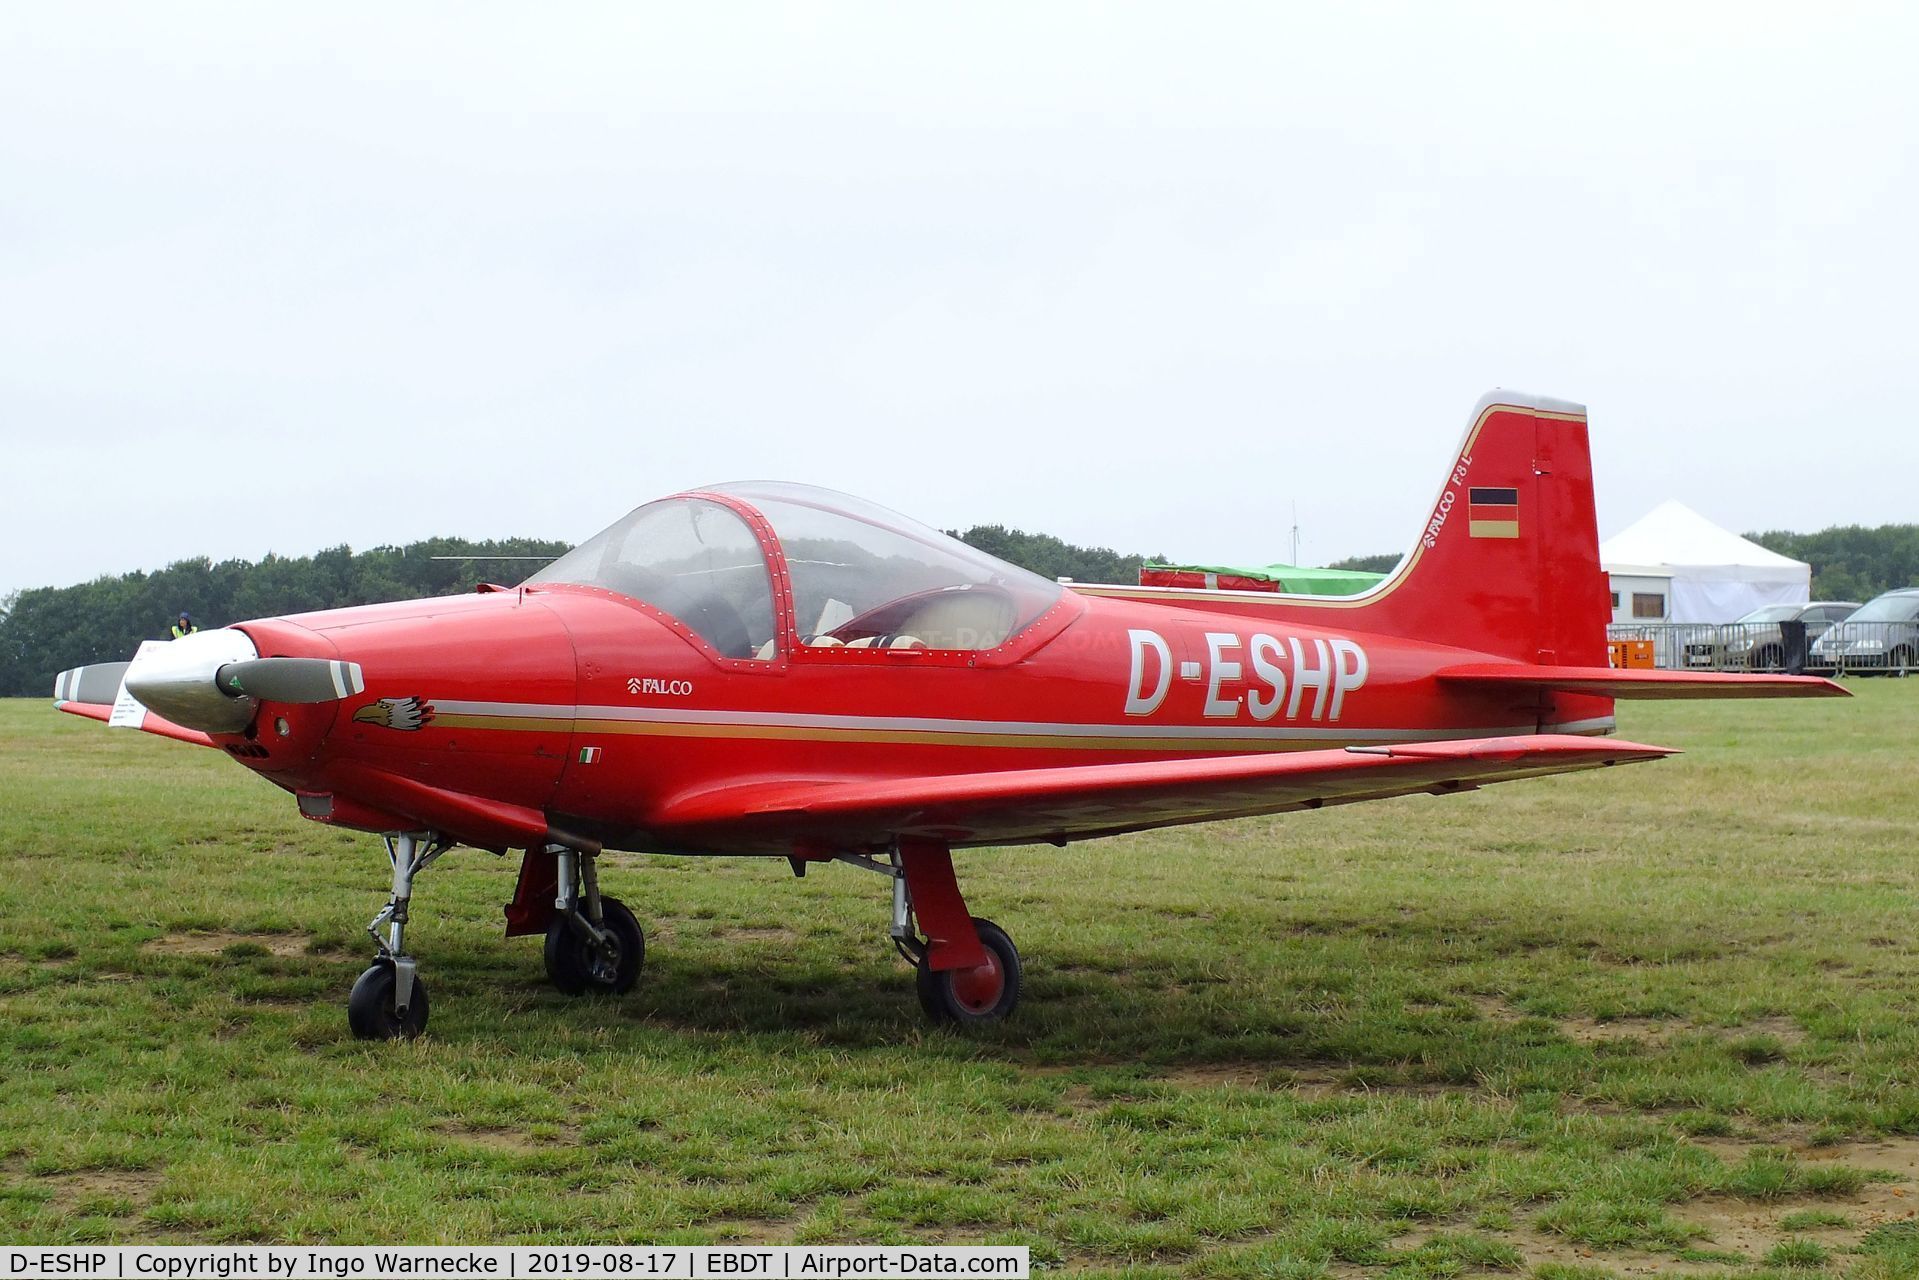 D-ESHP, 1997 Aeromere F-8L Falco III C/N 205, Aeromere F.8L Falco III at the 2019 Fly-in at Diest/Schaffen airfield